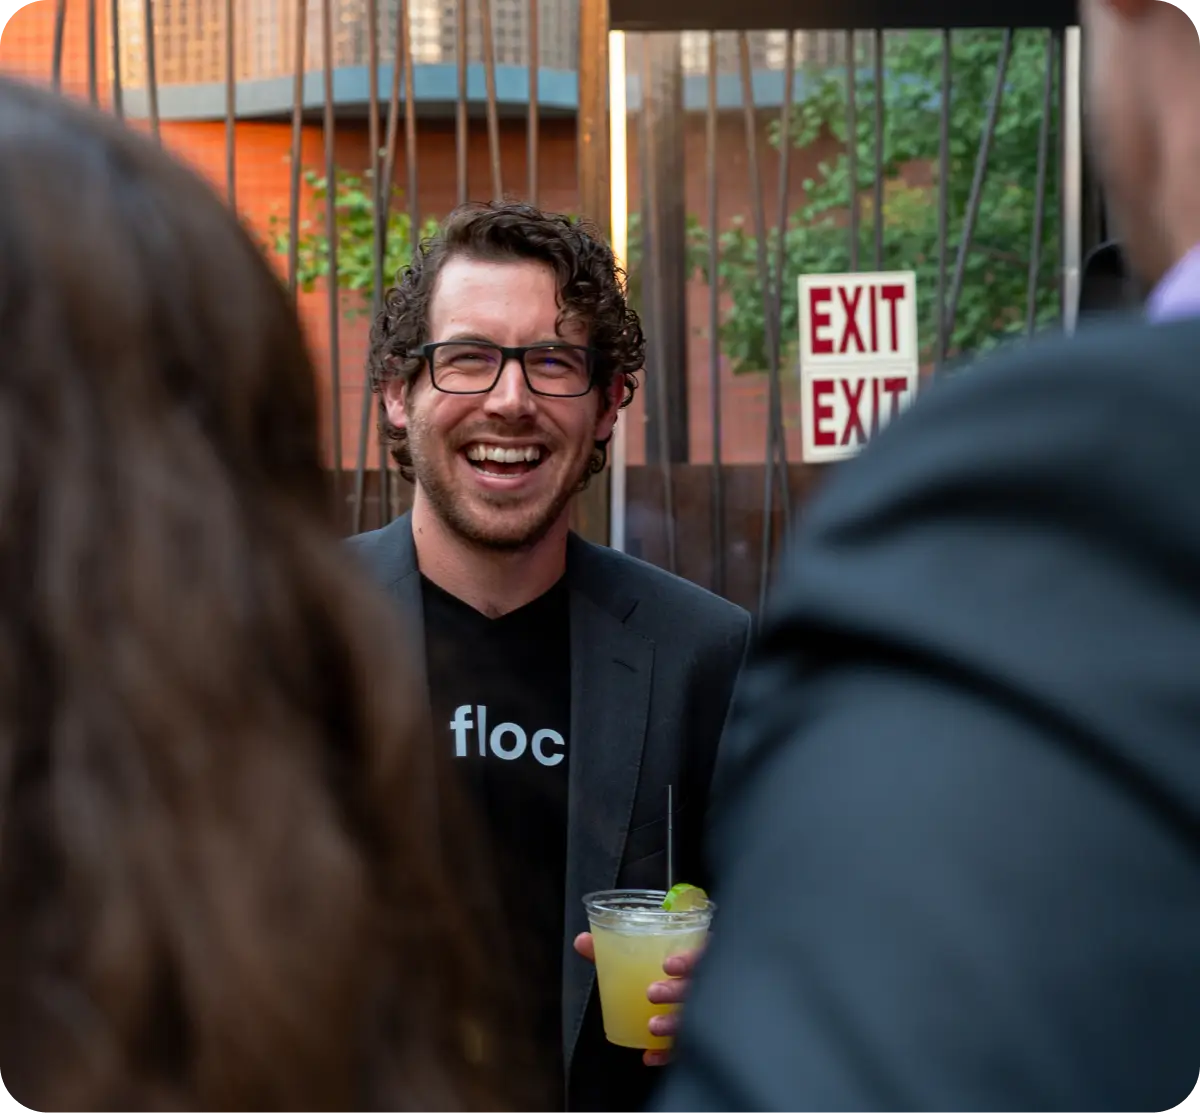 Devon Bleibtrey smiling and laughing while discussing generative AI with people.